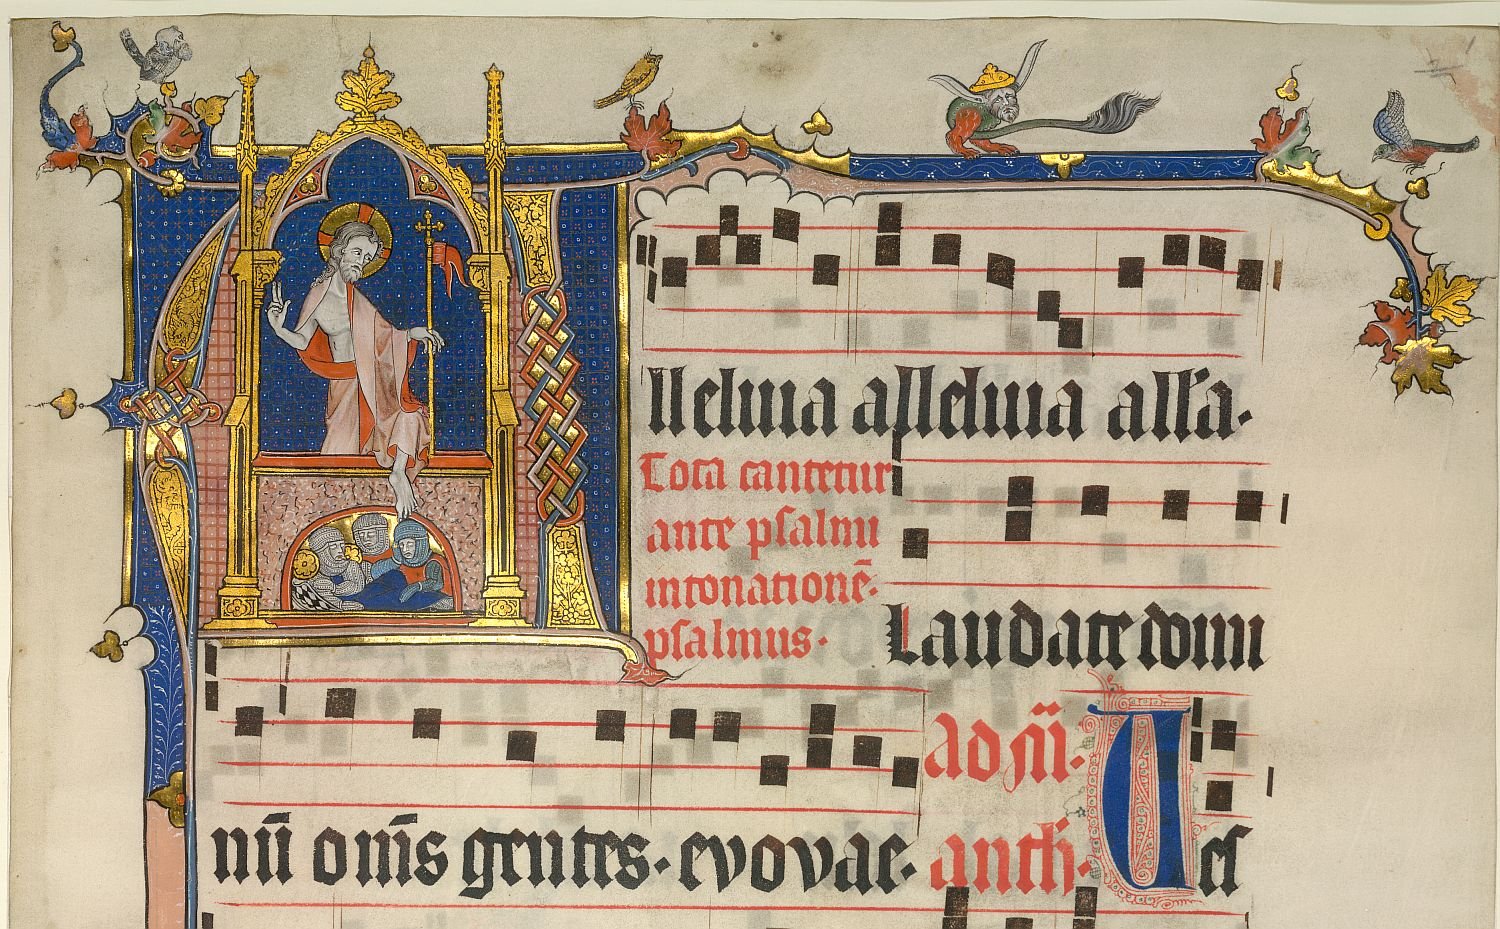 6 Medieval Illuminated Manuscripts That Will Amaze You